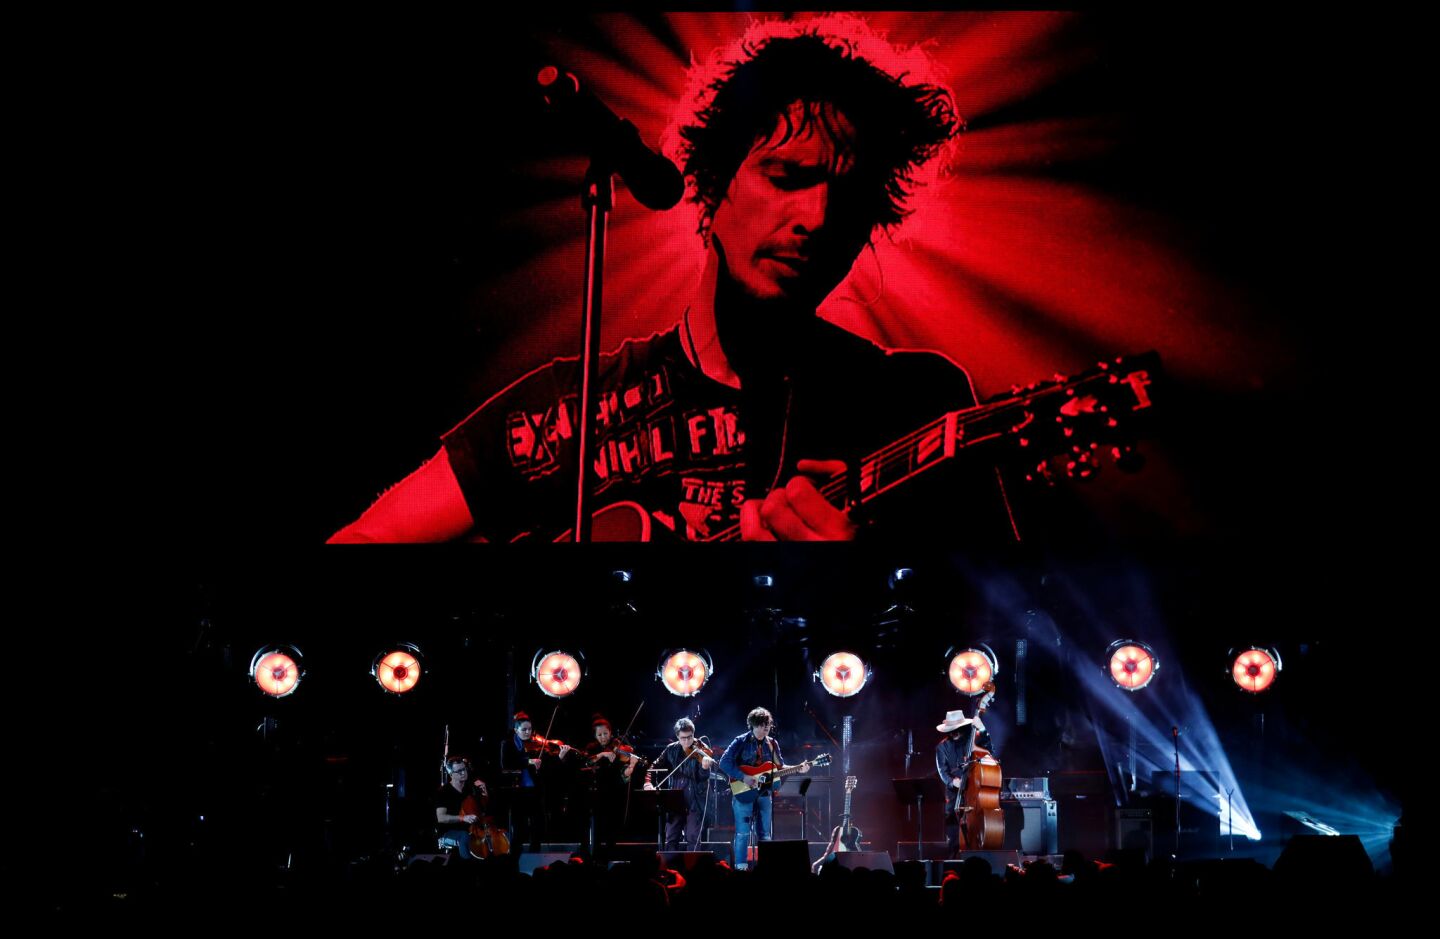 Ryan Adams turned Soundgarden’s “Fell on Black Days” into a moody roots-music number during a tribute concert for the late Chris Cornell at the Forum.